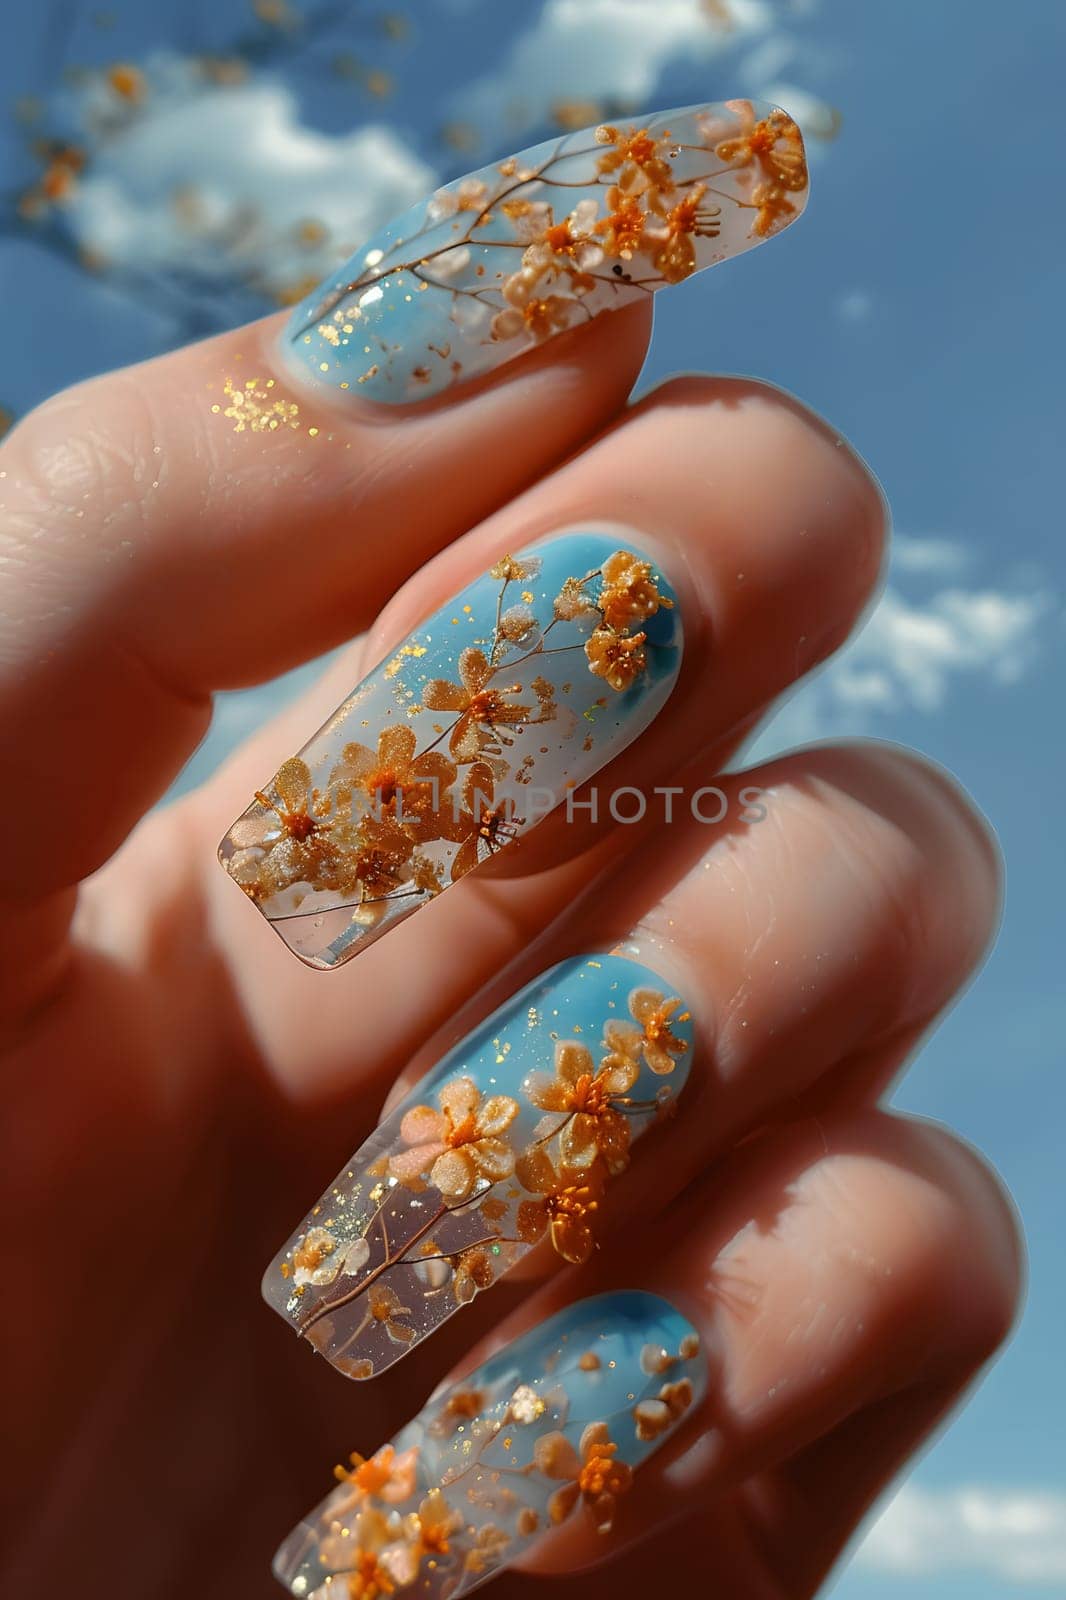 A close up of a persons nails with flowers on them set against a vibrant electric blue sky. The nails are a fashion accessory made from natural materials, displayed on the fingers and thumb